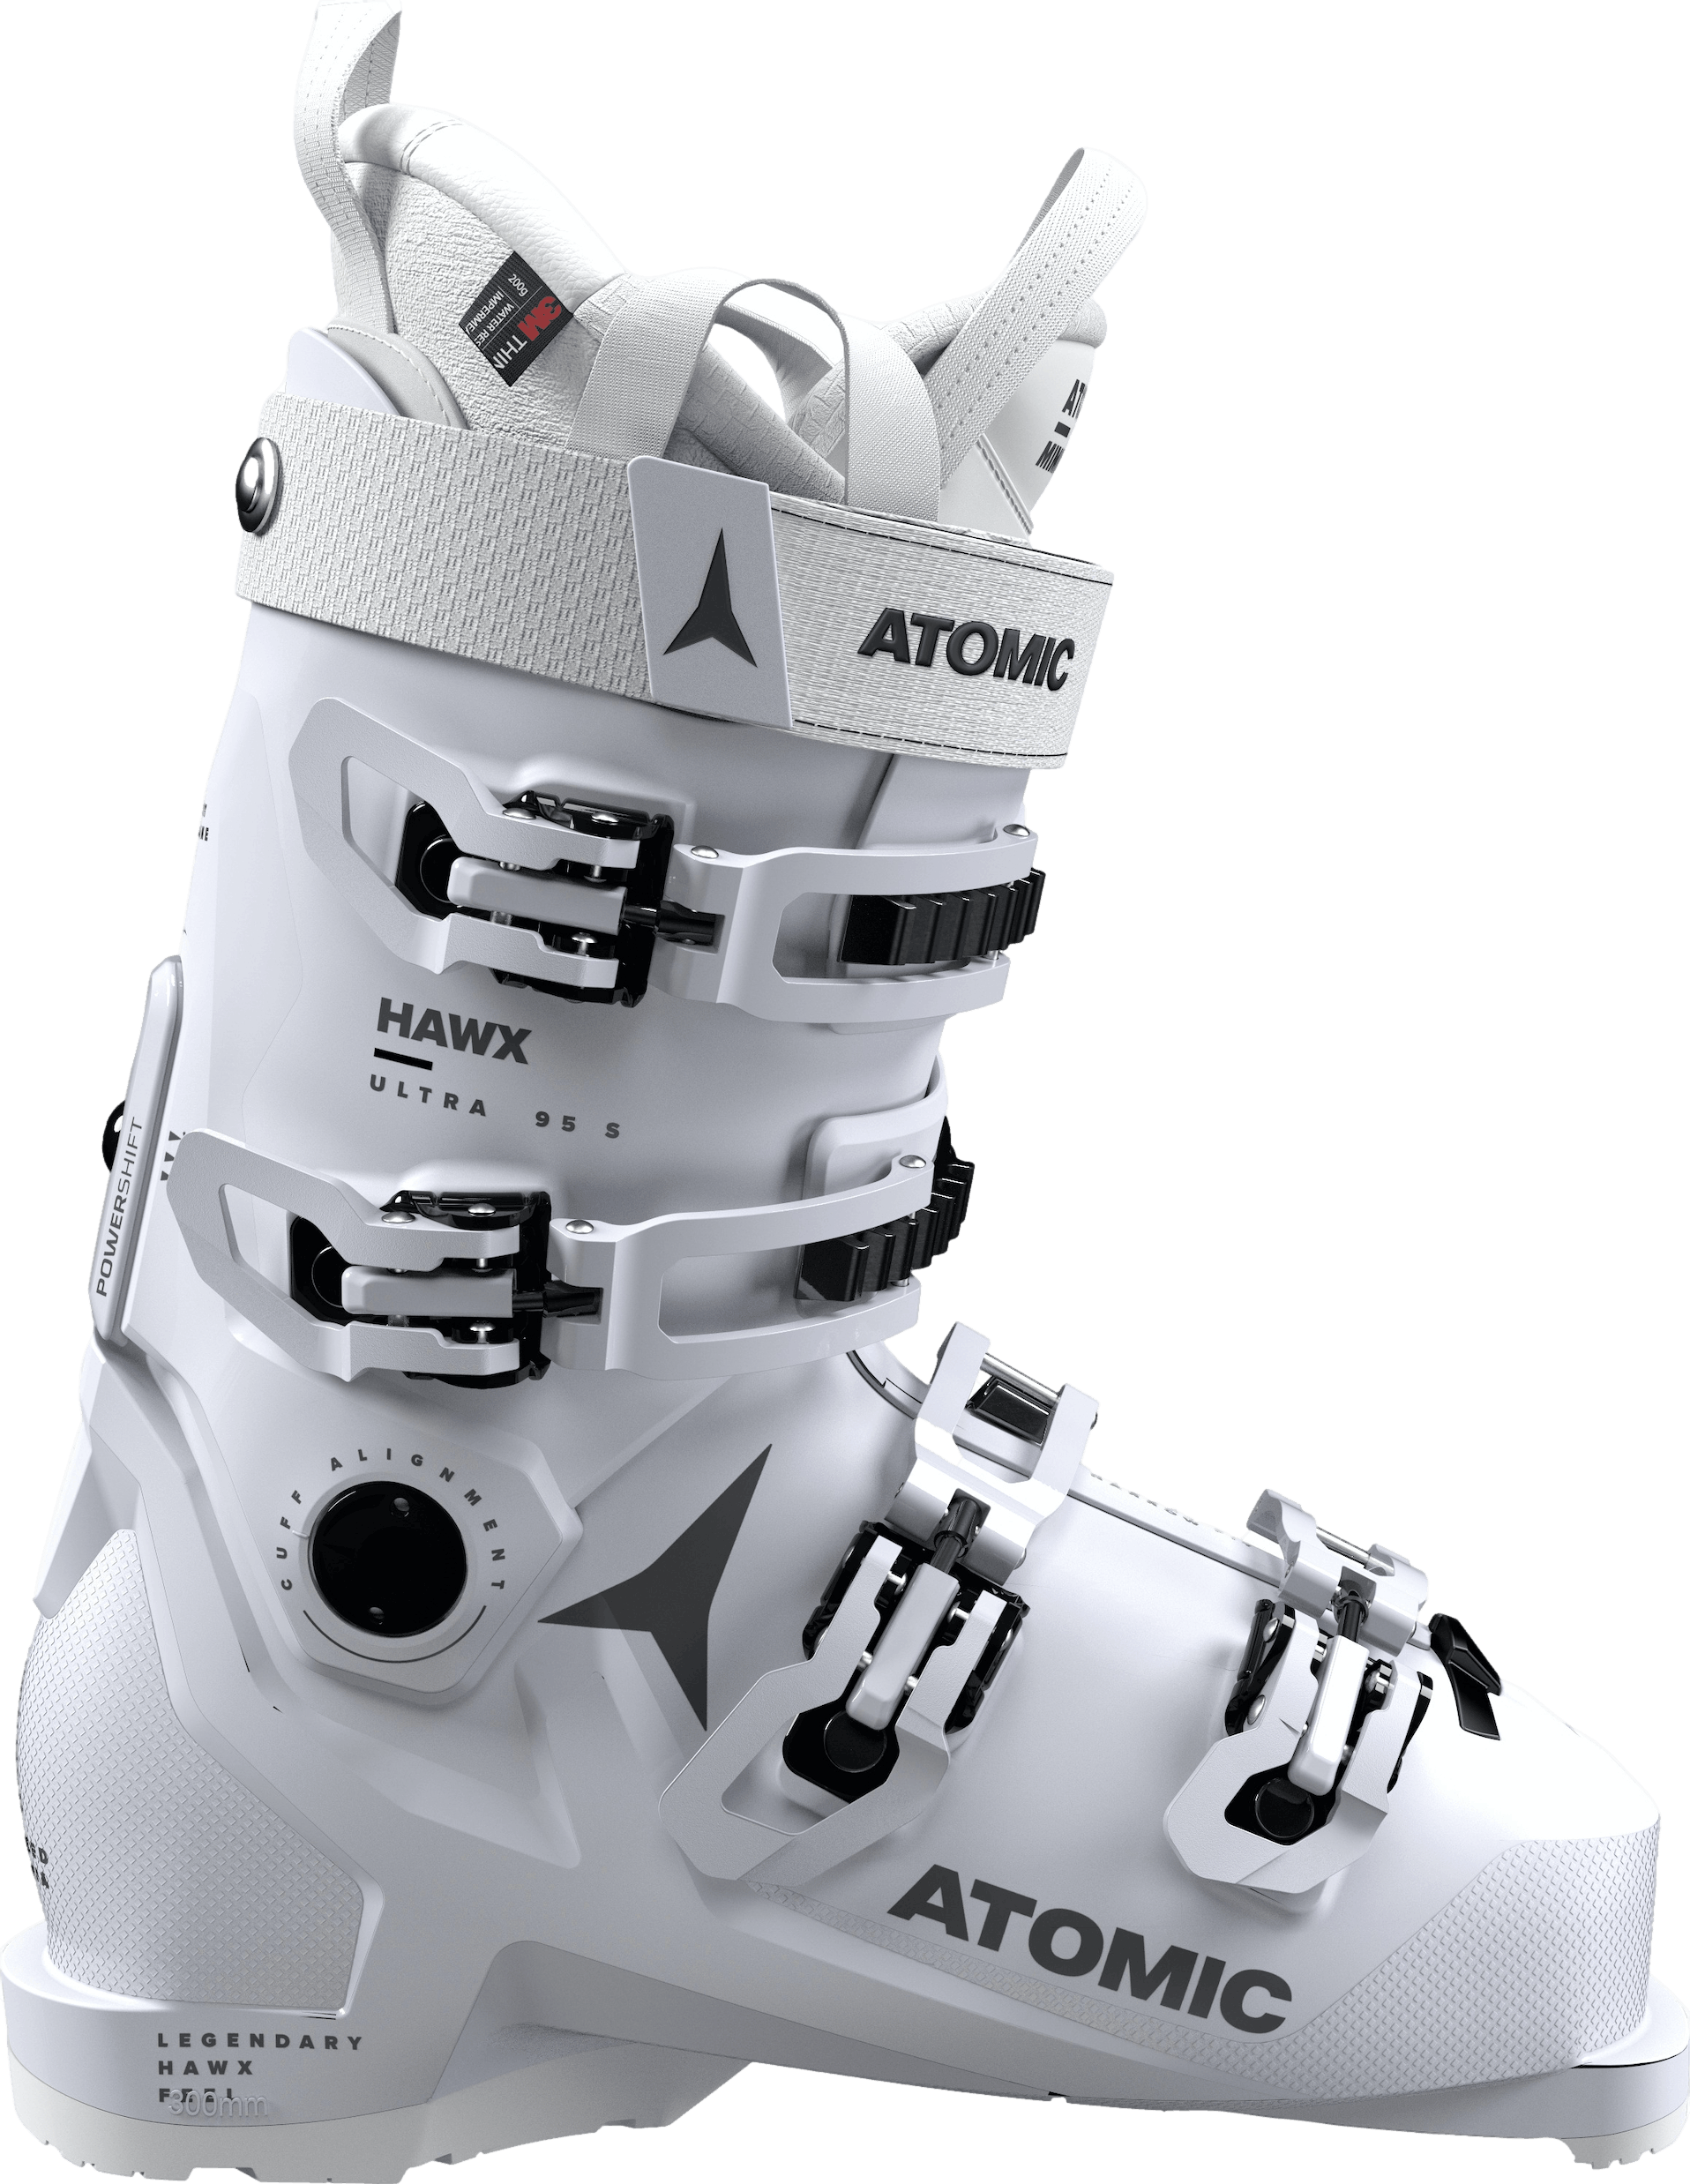 Top 10 Atomic Ski Boots of 2022-2023 | Curated.com